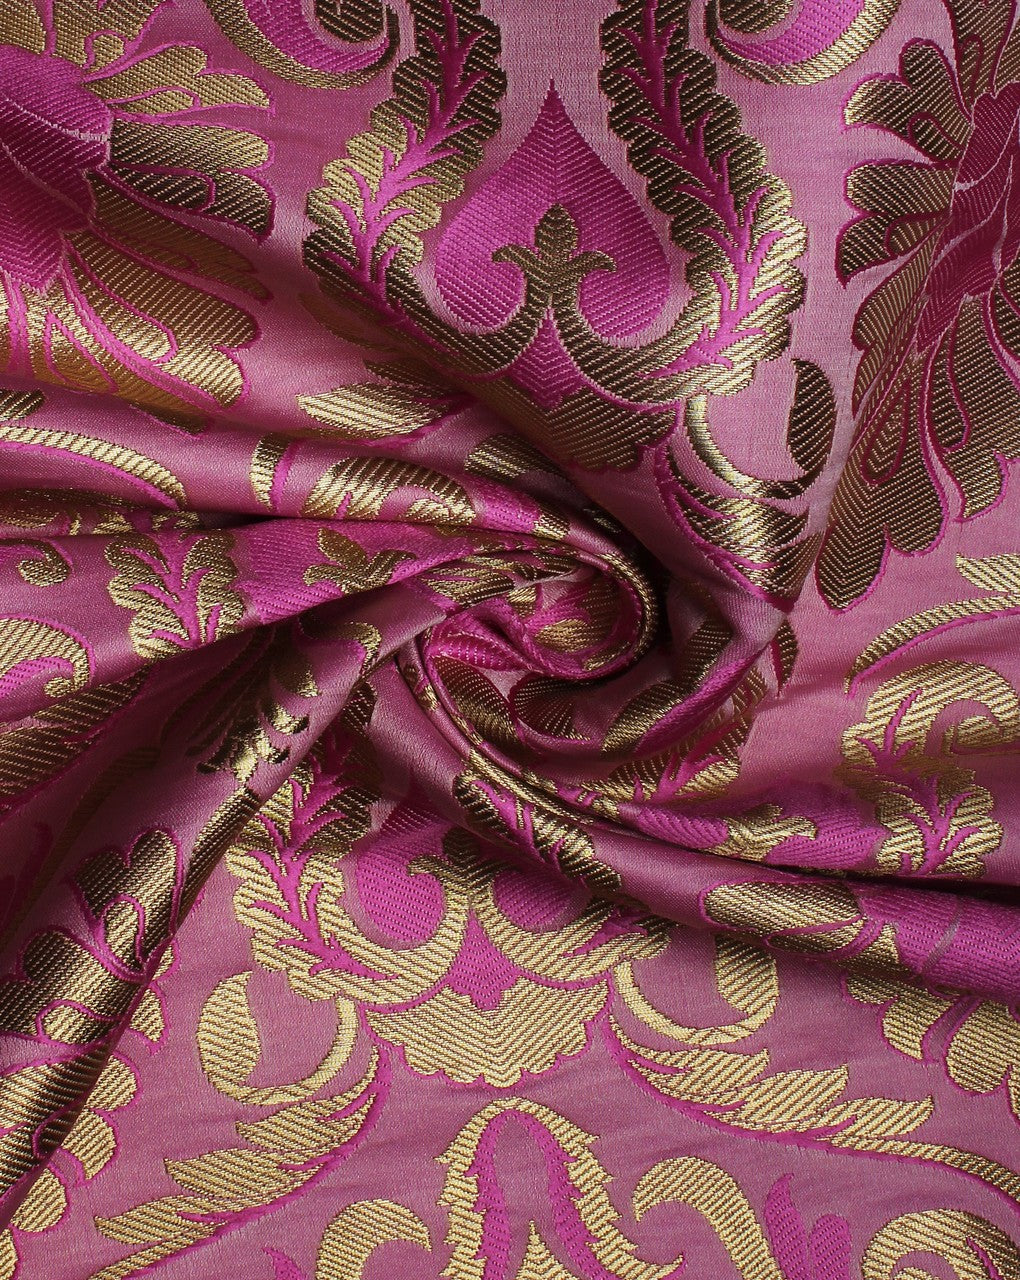 Light Pink And Golden Floral Design Polyester Brocade Fabric